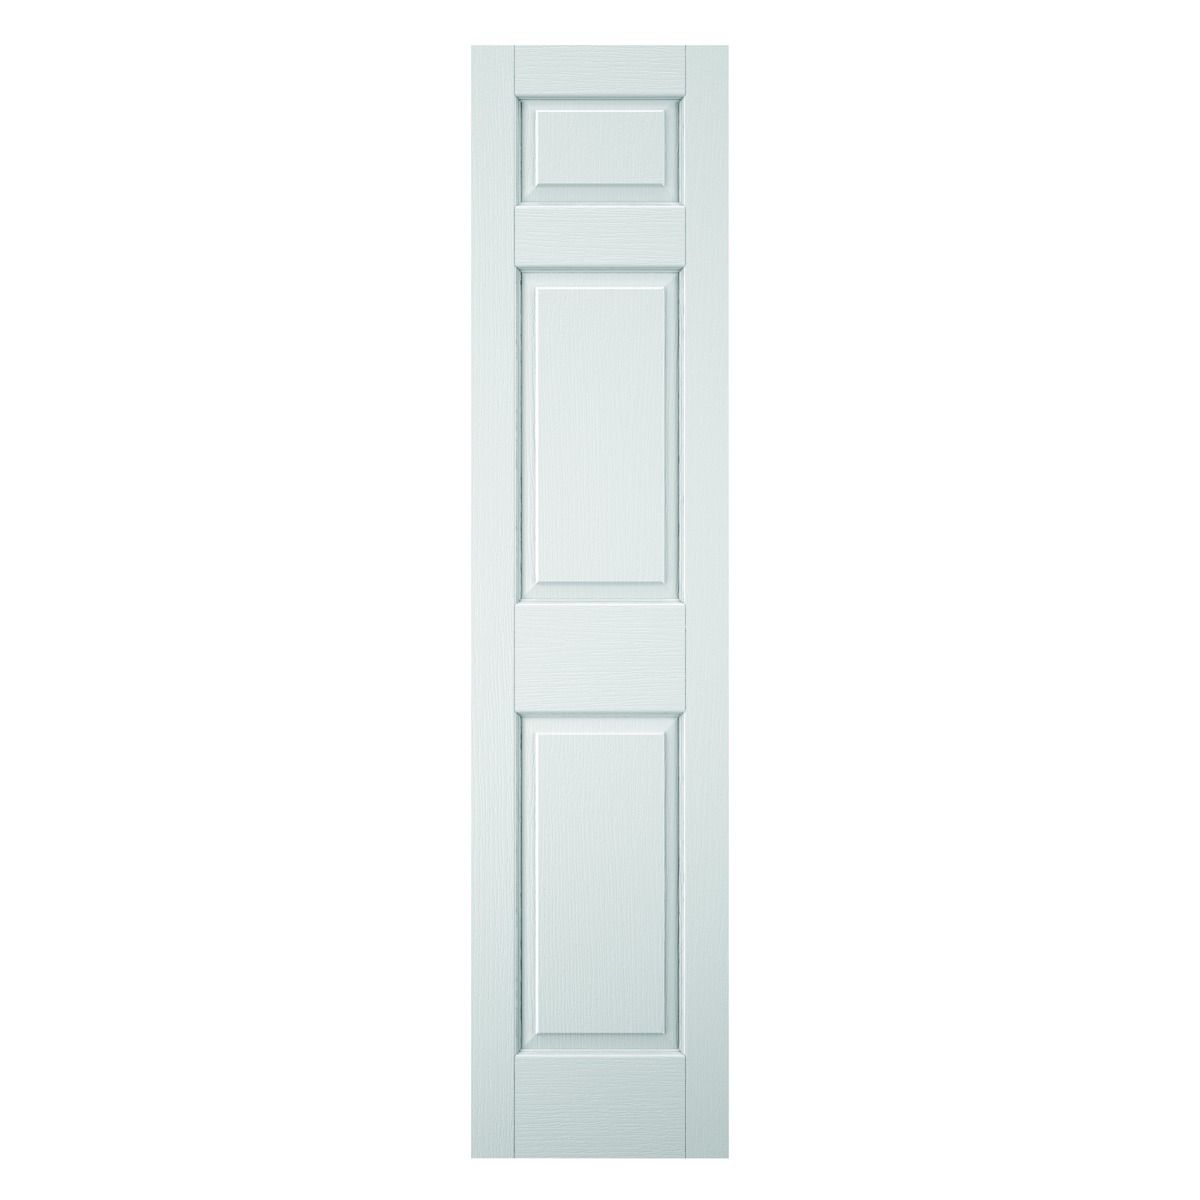 Wickes Lincoln White Moulded 3 Panel Internal Door